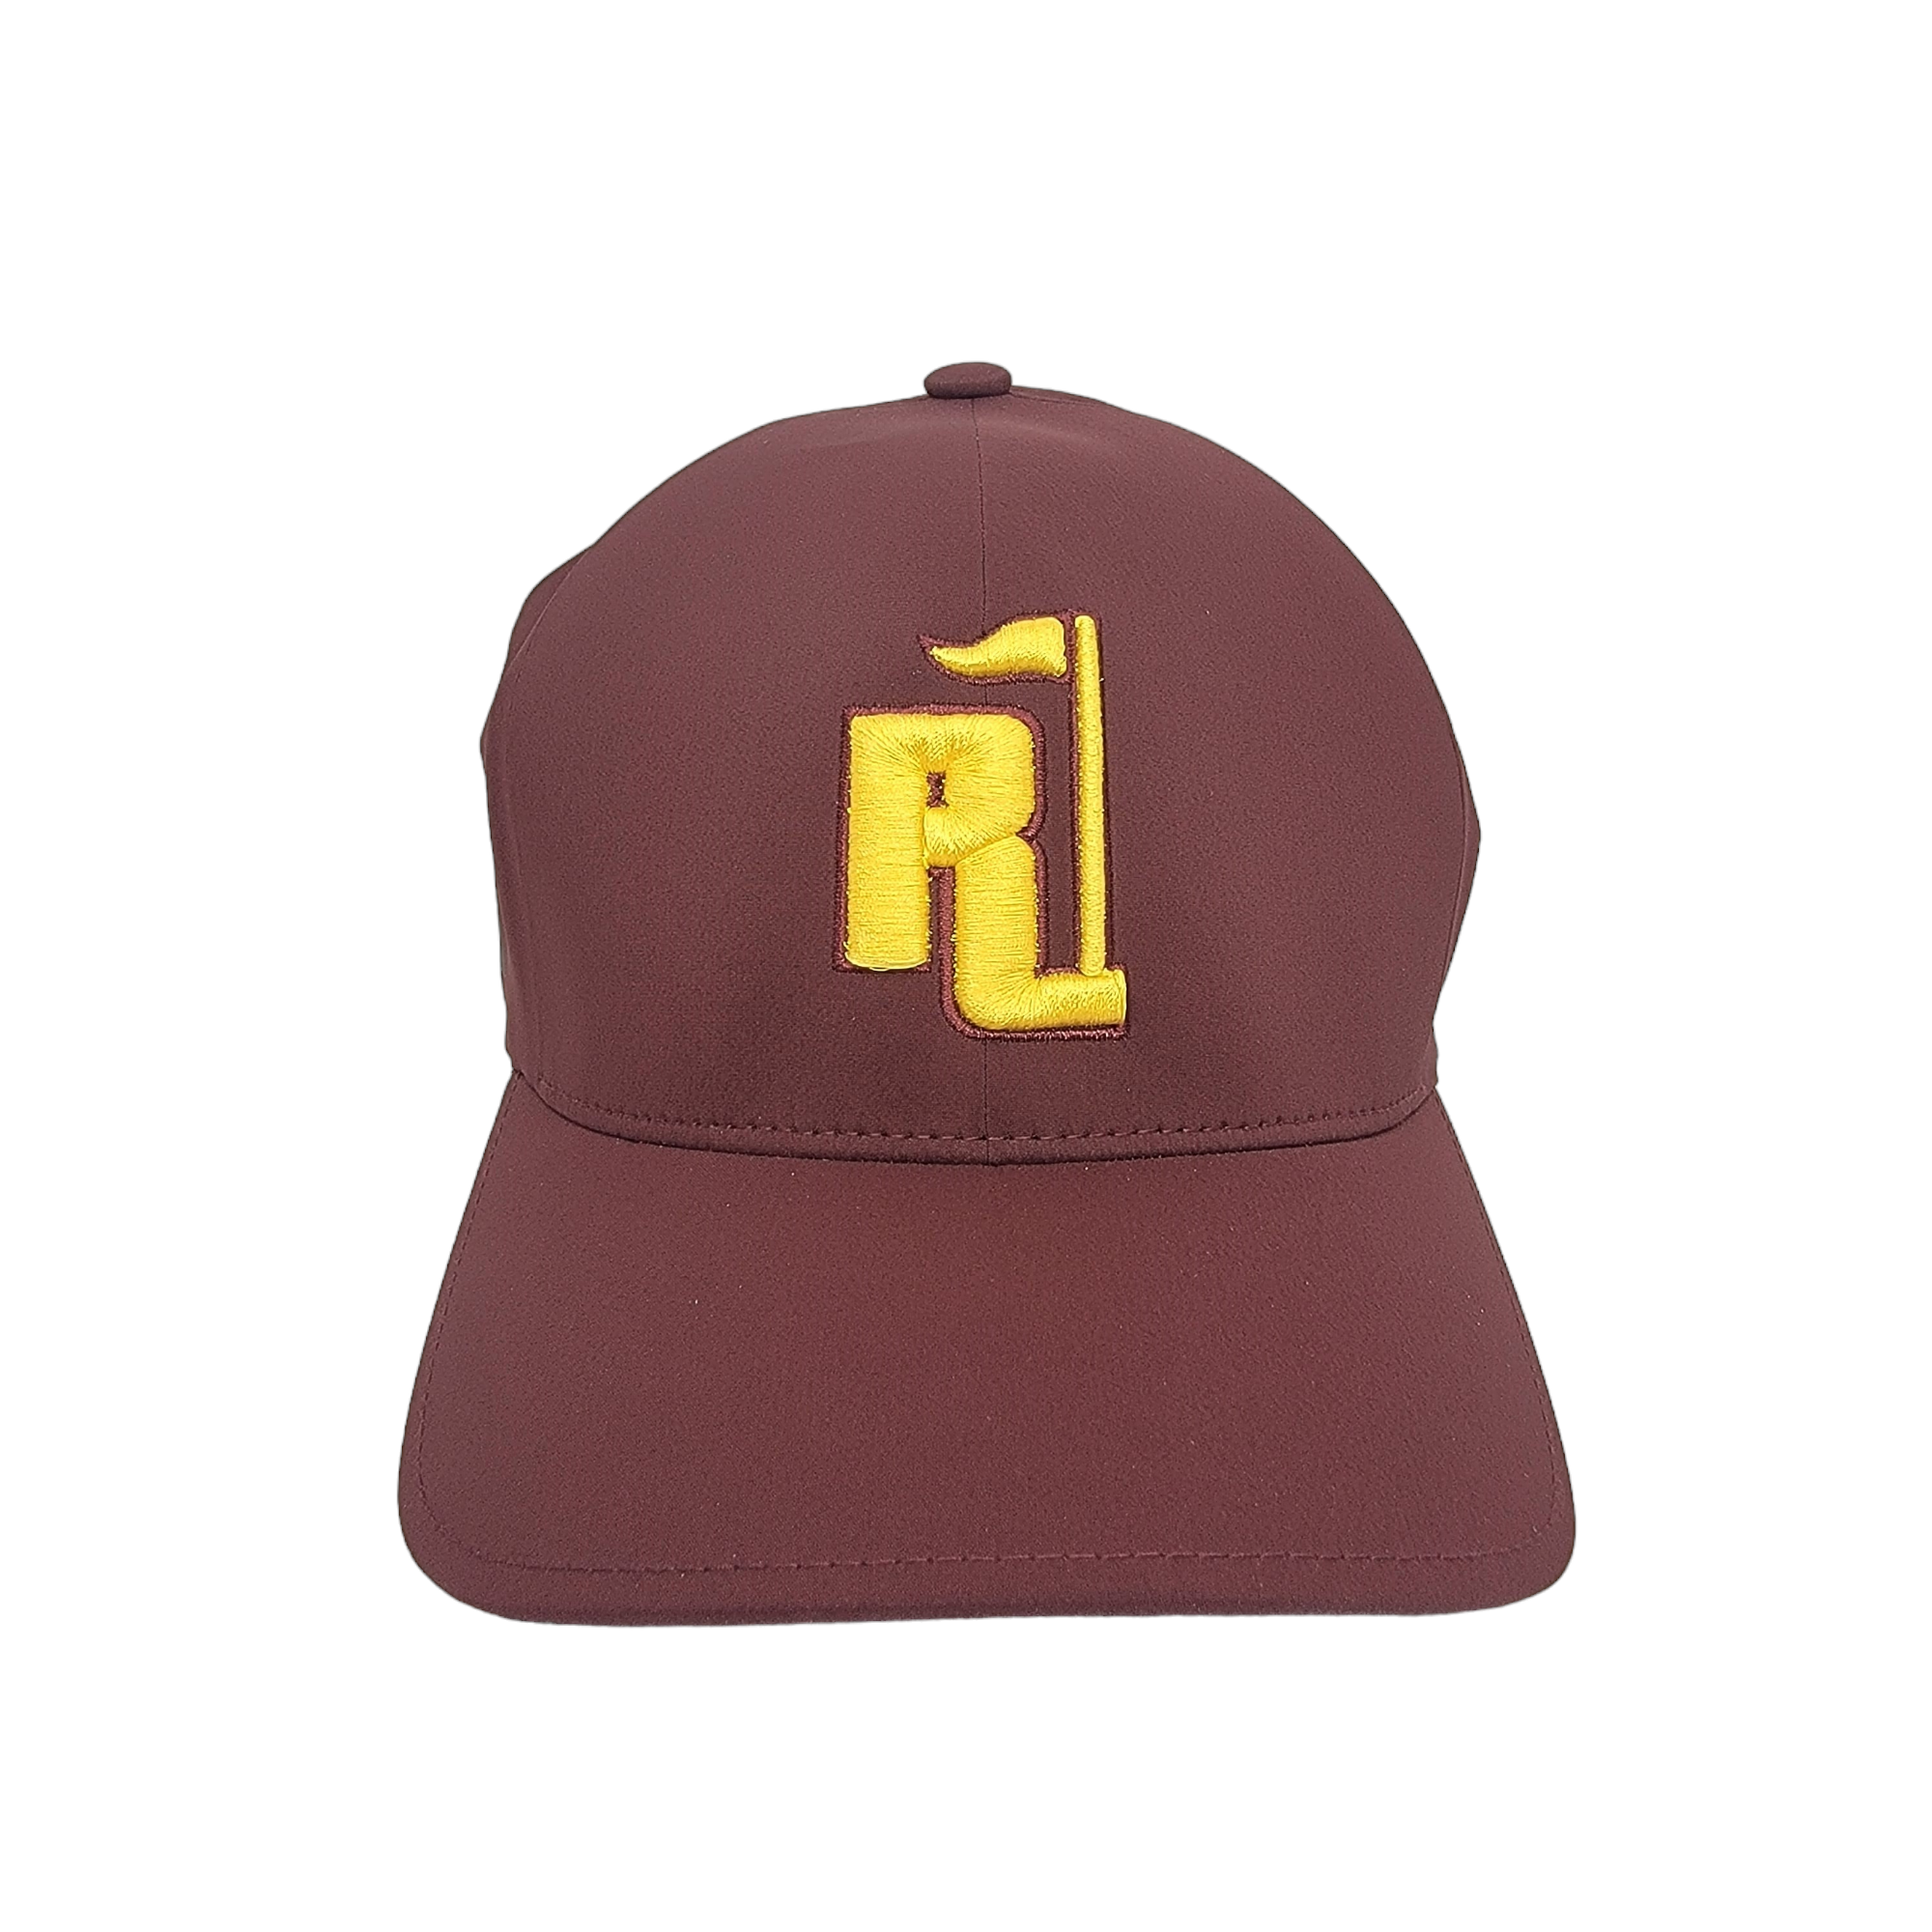 Raza Golf Maroon Fitted Hat with Yellow and Marron Logo